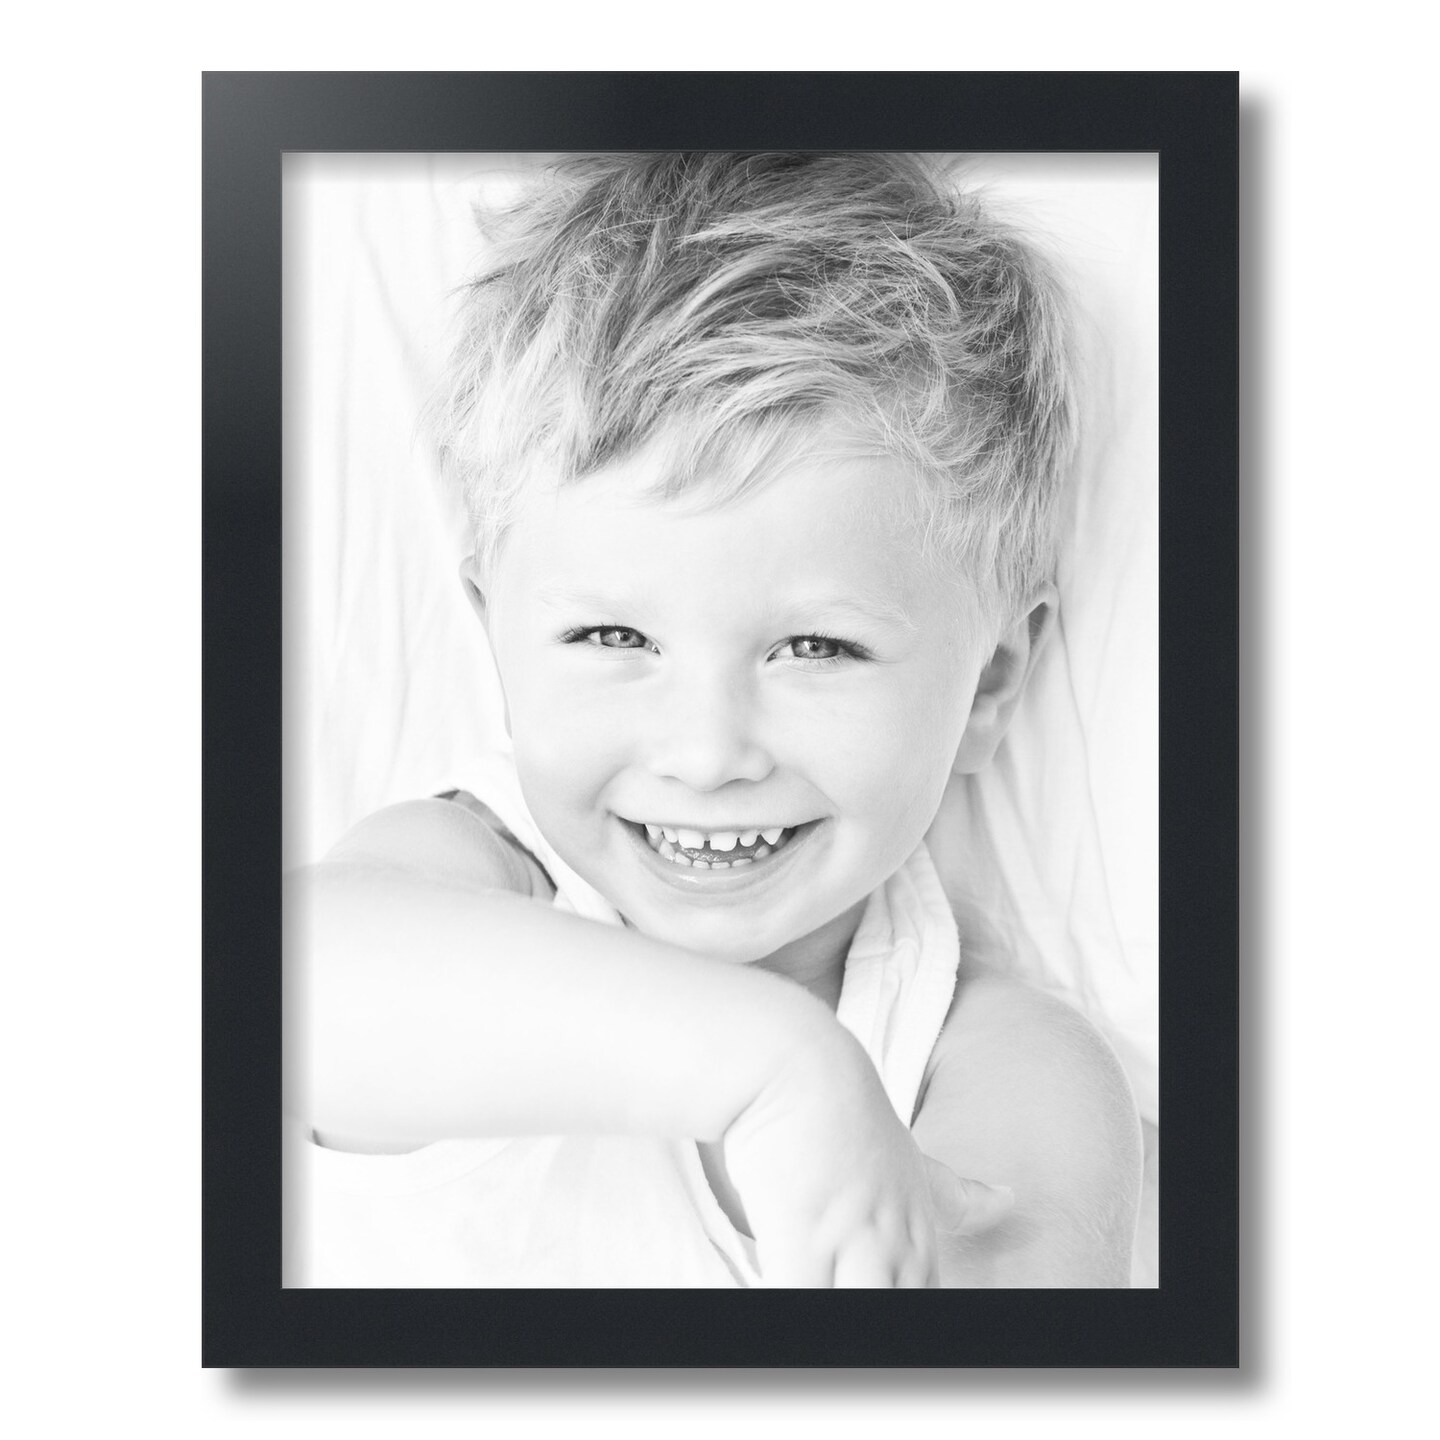 ArtToFrames 14x18 Inch  Picture Frame, This 1.25 Inch Custom MDF Poster Frame is Available in Multiple Colors, Great for Your Art or Photos - Comes with Regular Glass and  Corrugated (A46KD)